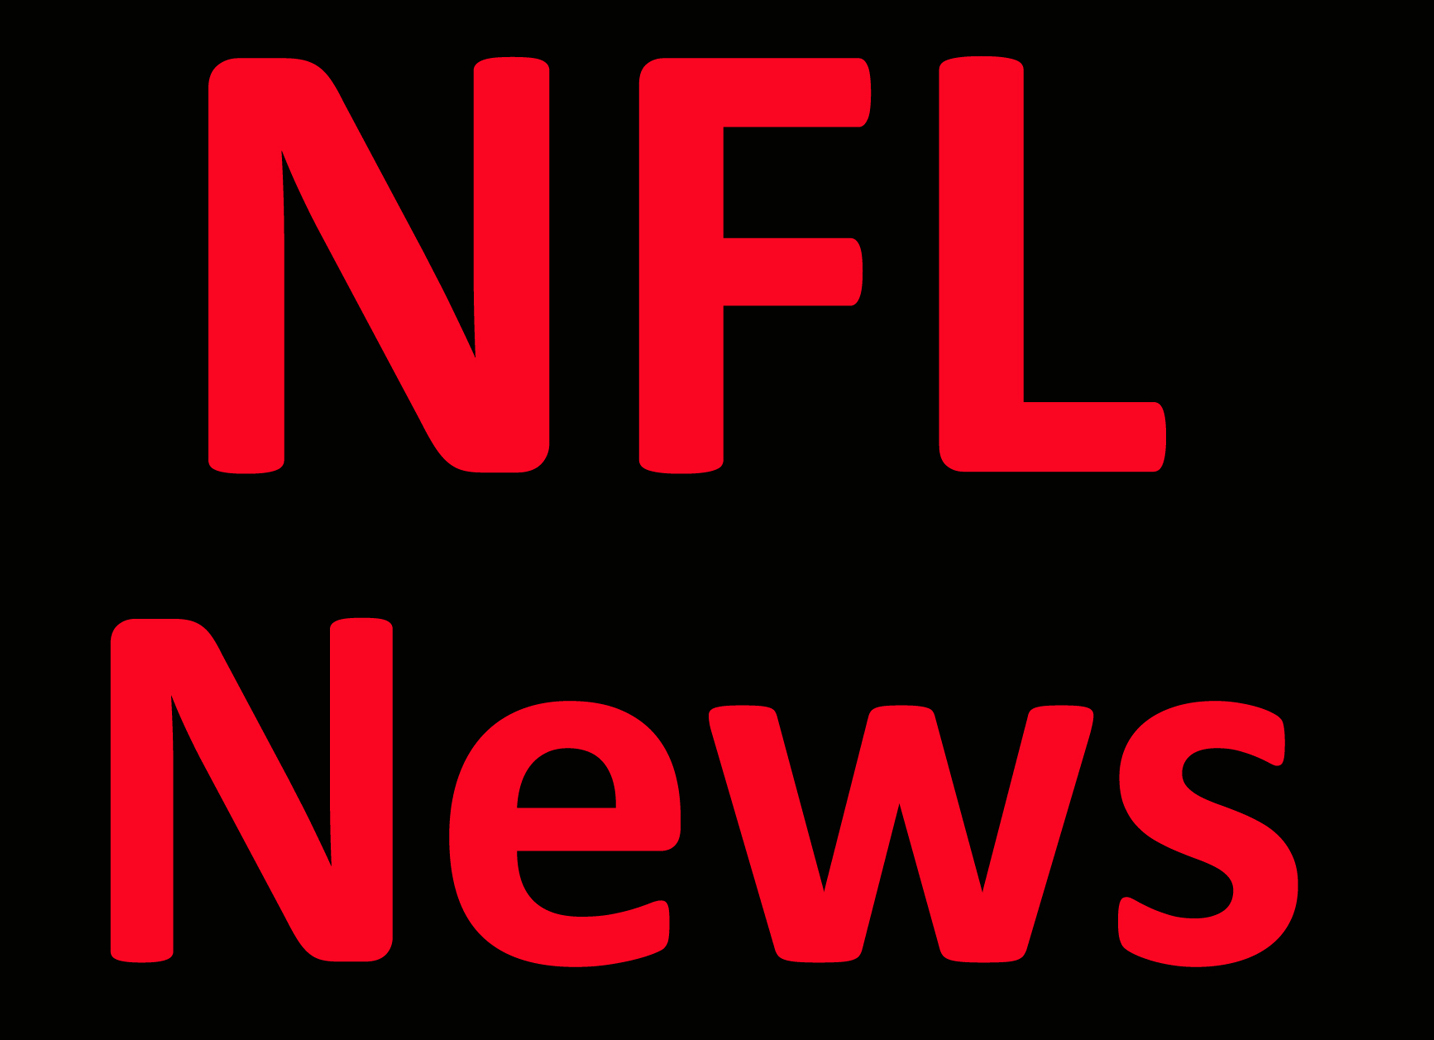 NFL News: Fins rule Tua out vs. Raiders with fractured ribs Per Report